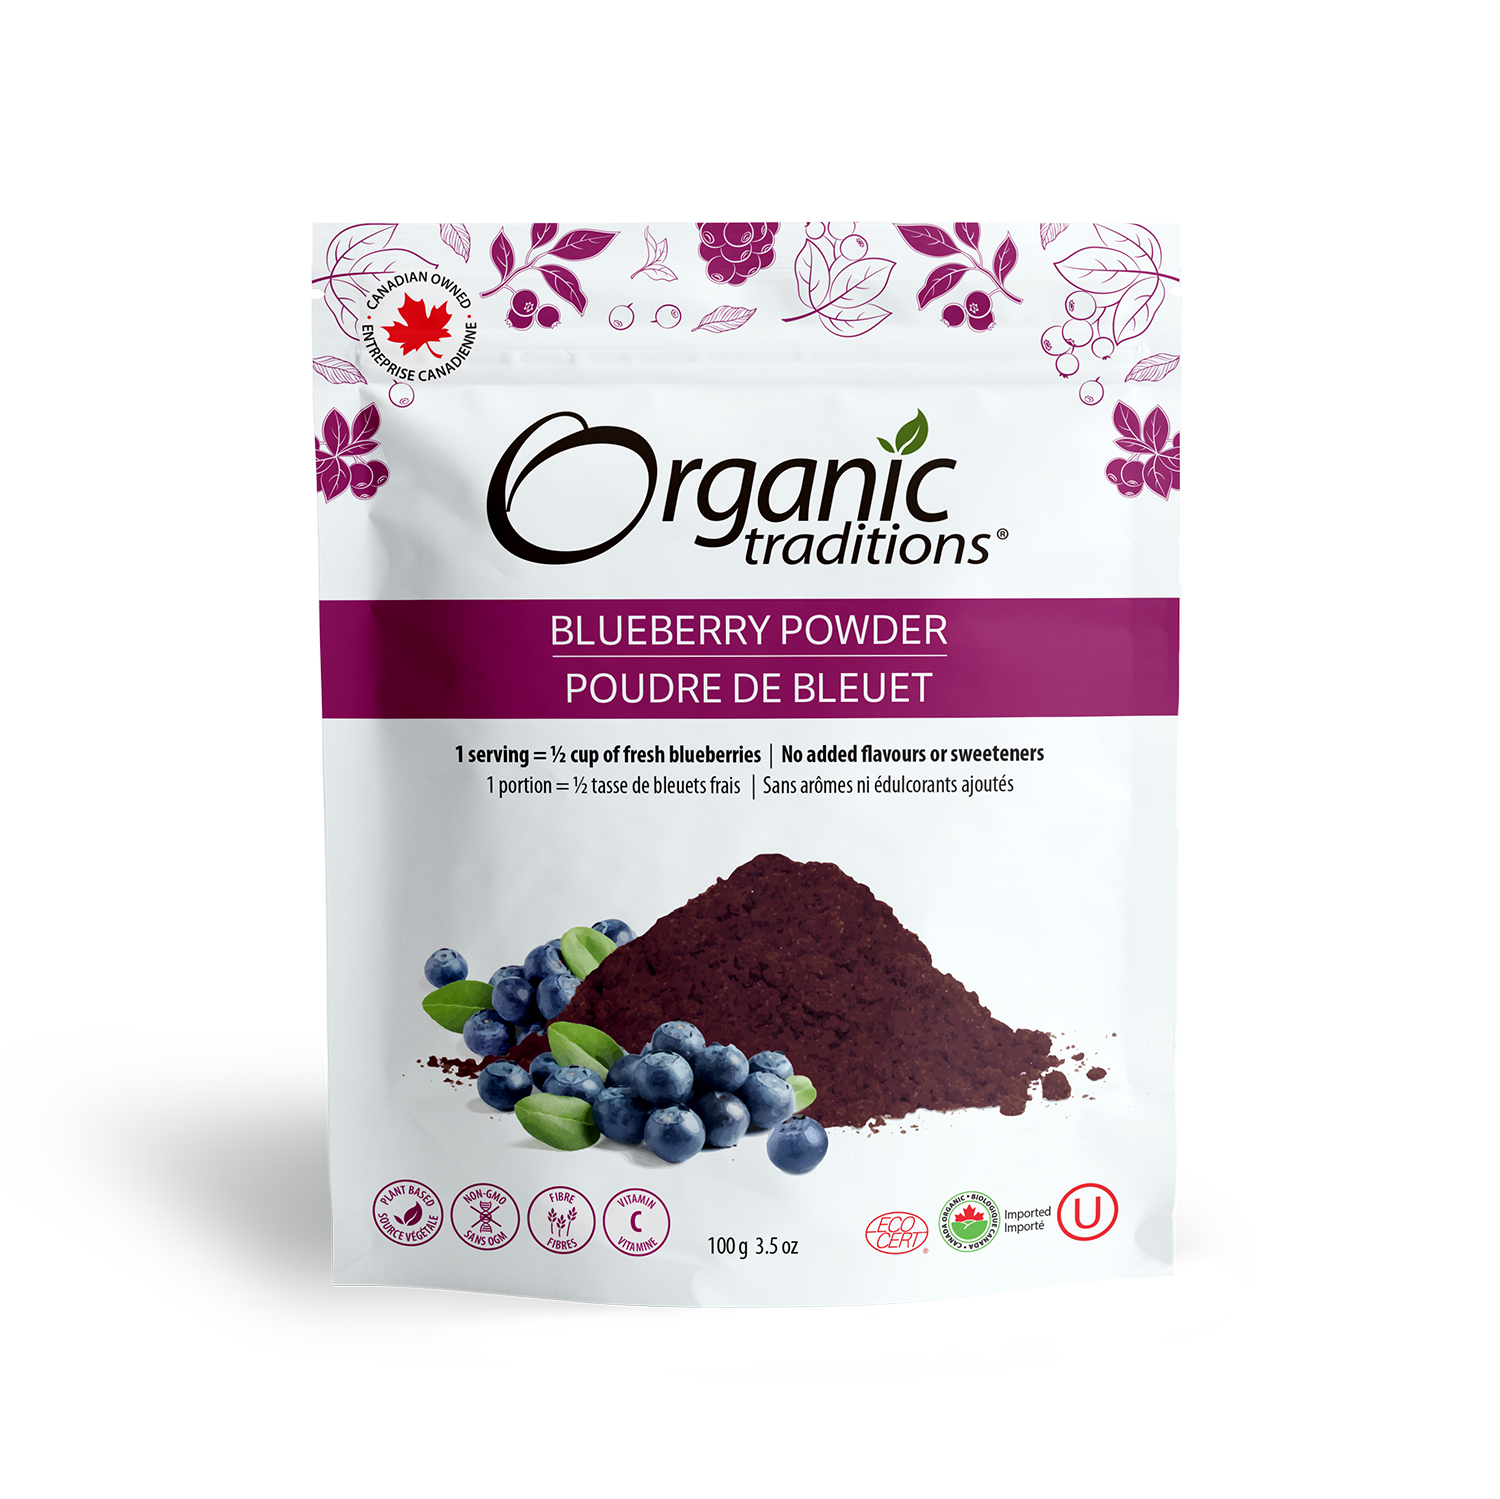 organic traditions blueberry powder front of bag image